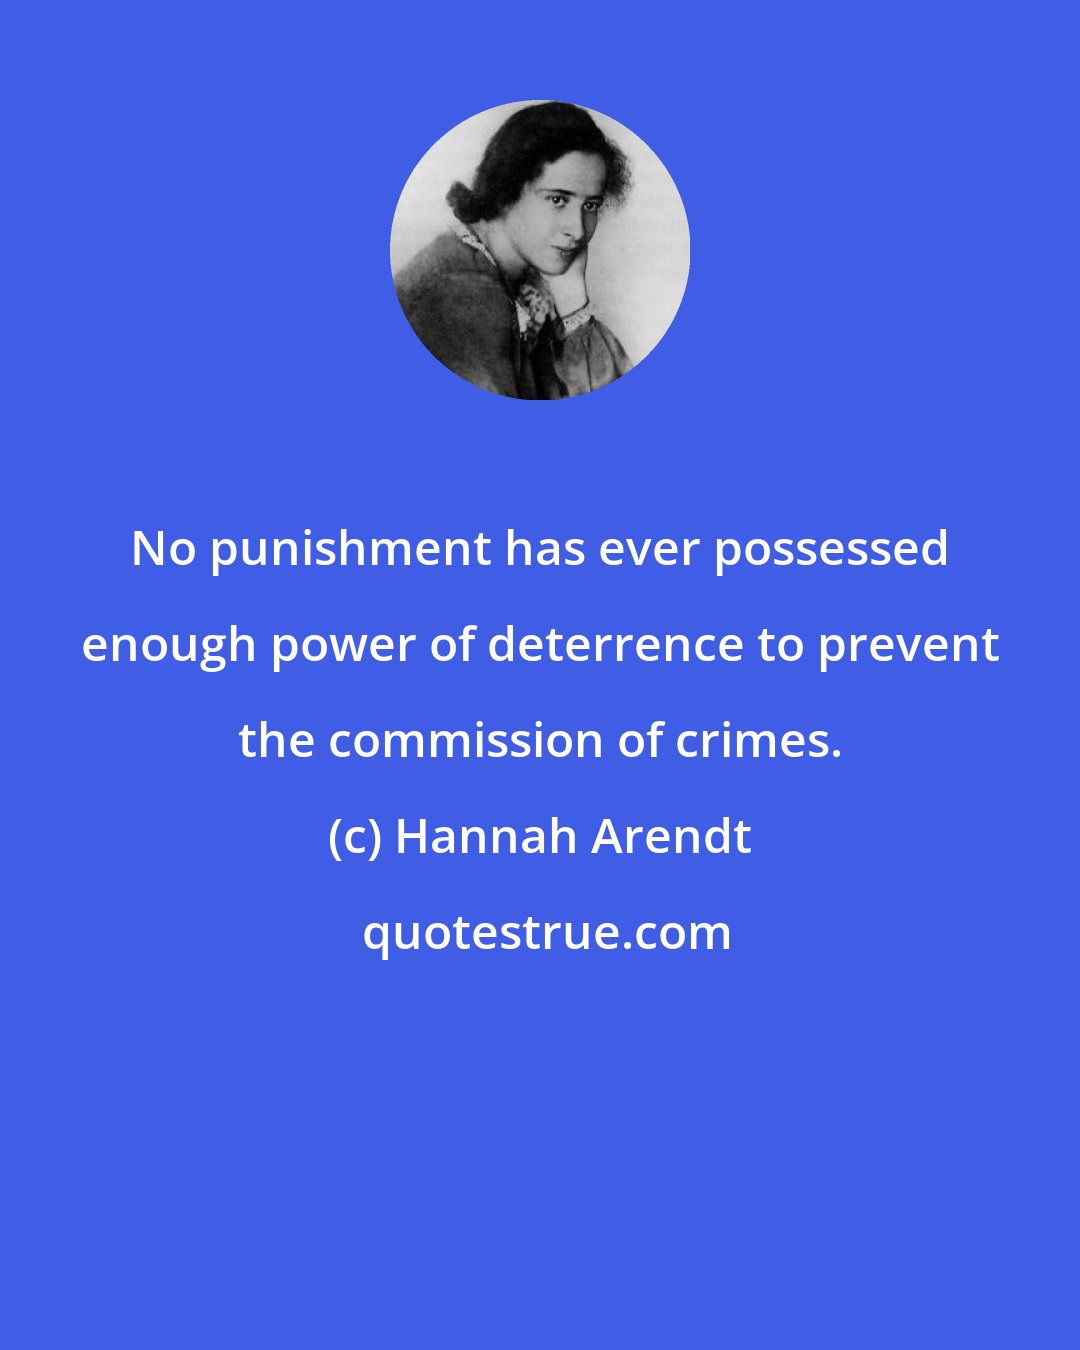 Hannah Arendt: No punishment has ever possessed enough power of deterrence to prevent the commission of crimes.